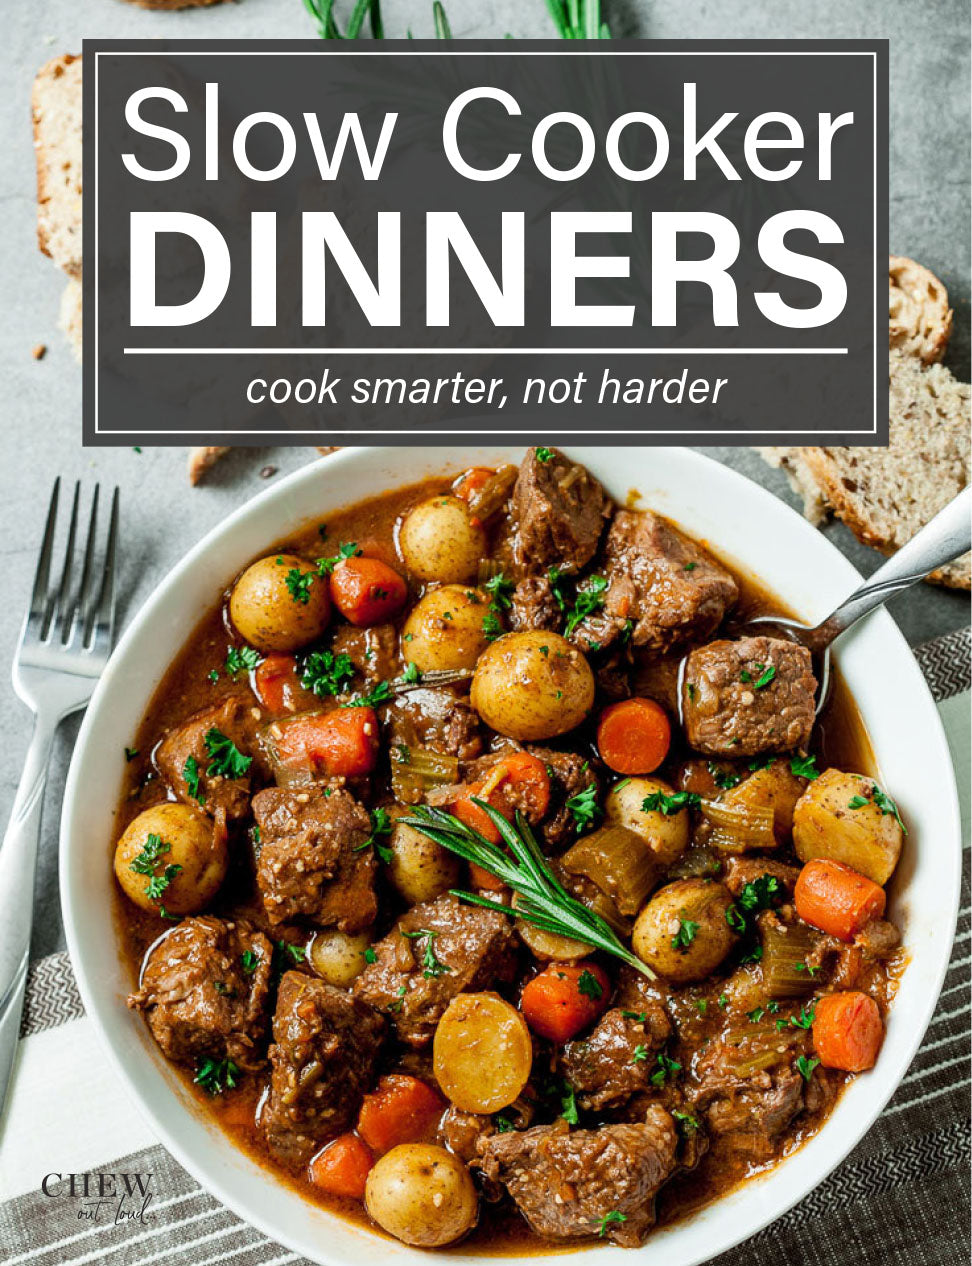 Slow Cooker Dinners eBook